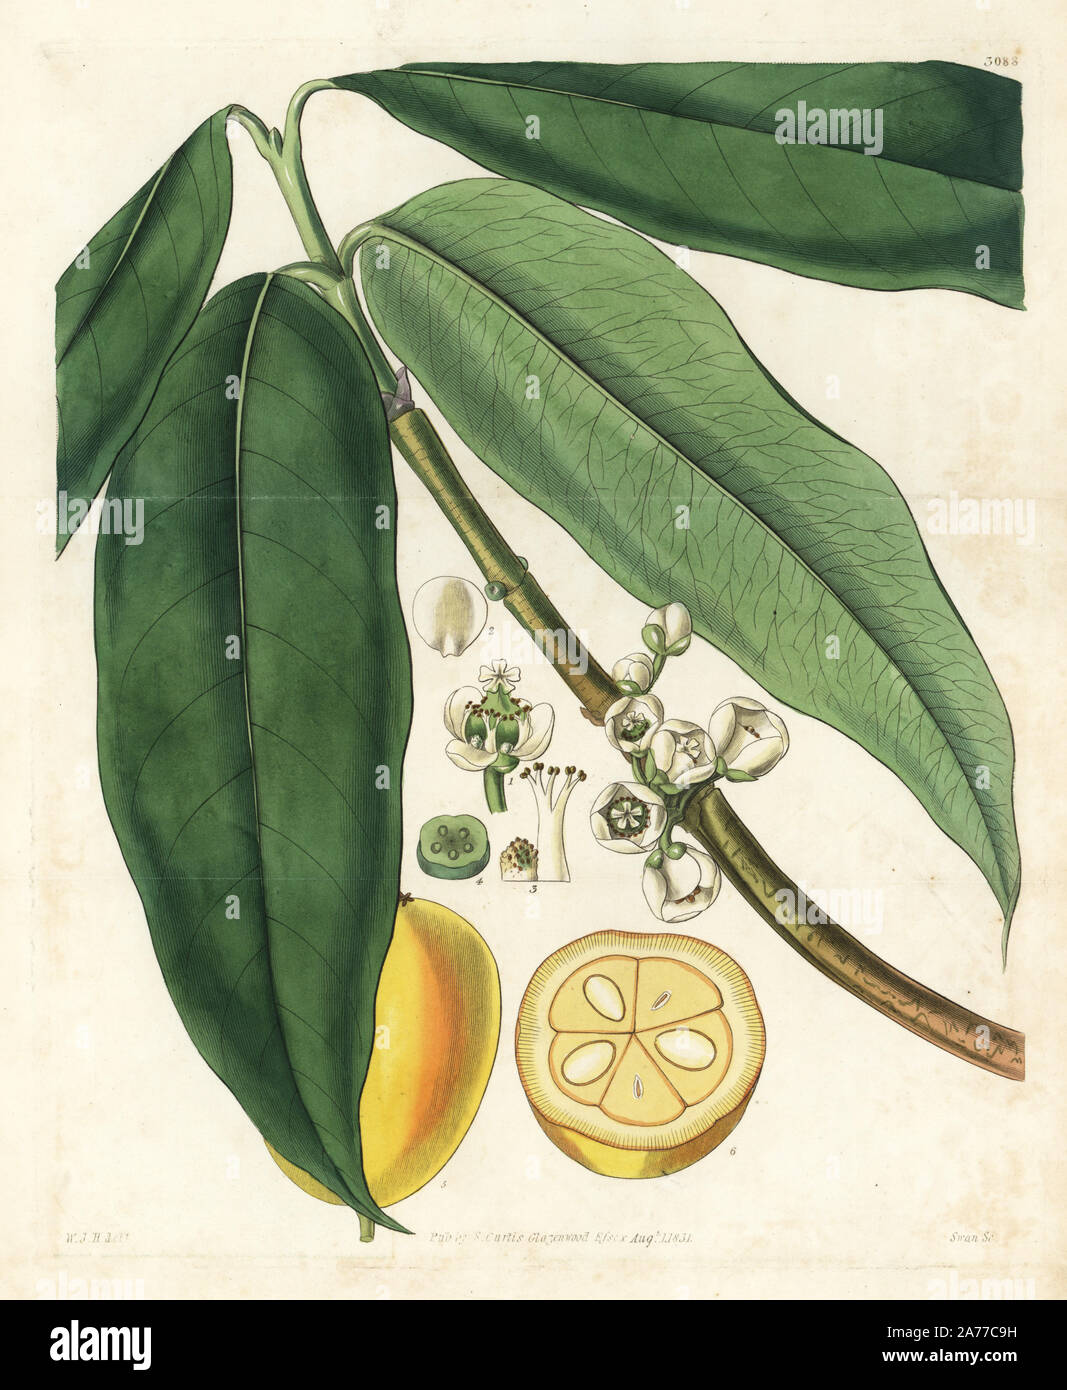 Mundu or rata, Garcinia dulcis (Sweet-fruited xanthochymus, Xanthochymus dulcis) tropical fruit, flower, leaf, fruit in section. Handcoloured copperplate engraving by Swan after an illustration by William Jackson Hooker from Samuel Curtis's 'Botanical Magazine,' London, 1831. Stock Photo